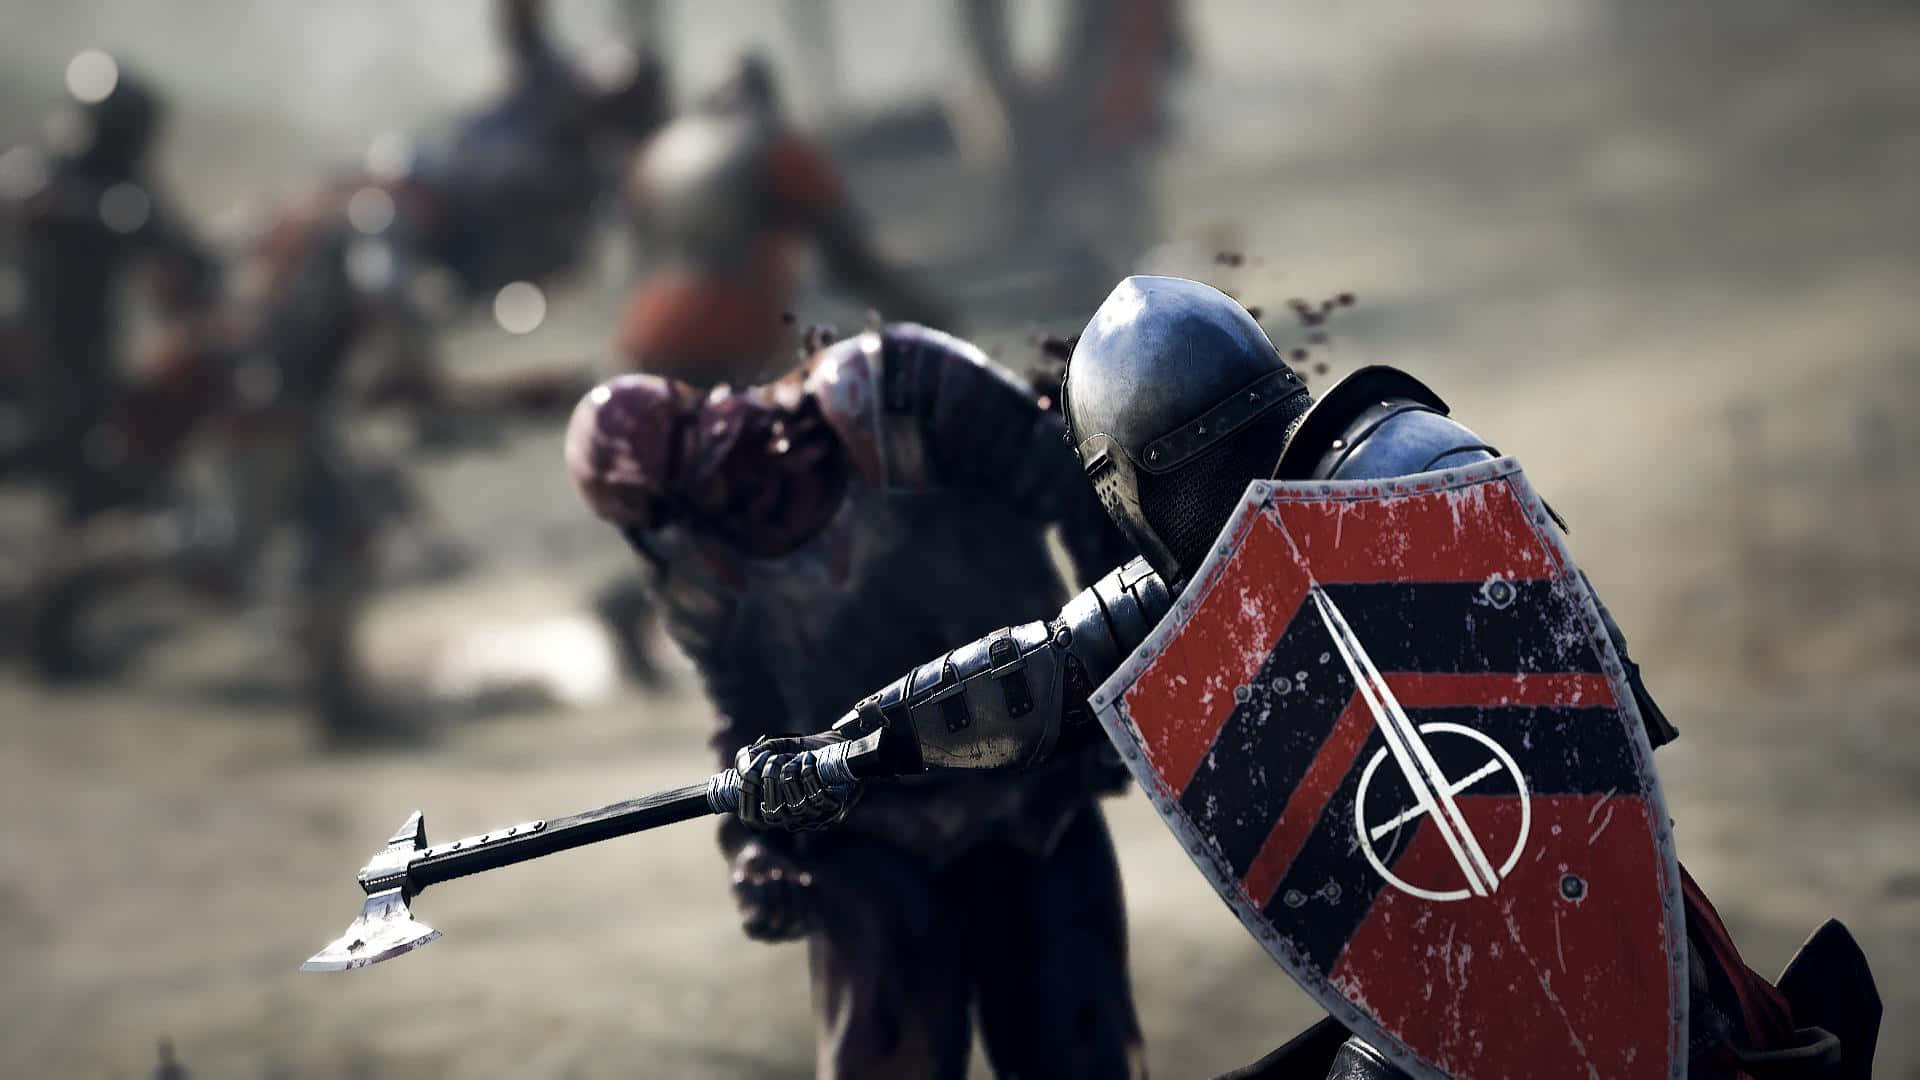 Best Mordhau Background Fighting With An Axe